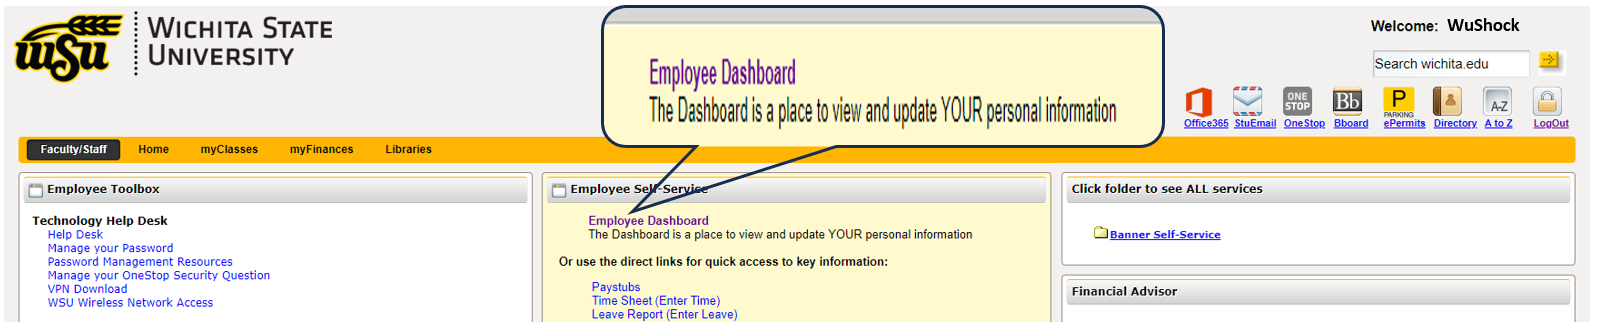 Employee self services screenshot with callout bubble of the Employee Dashboard link in the center column.